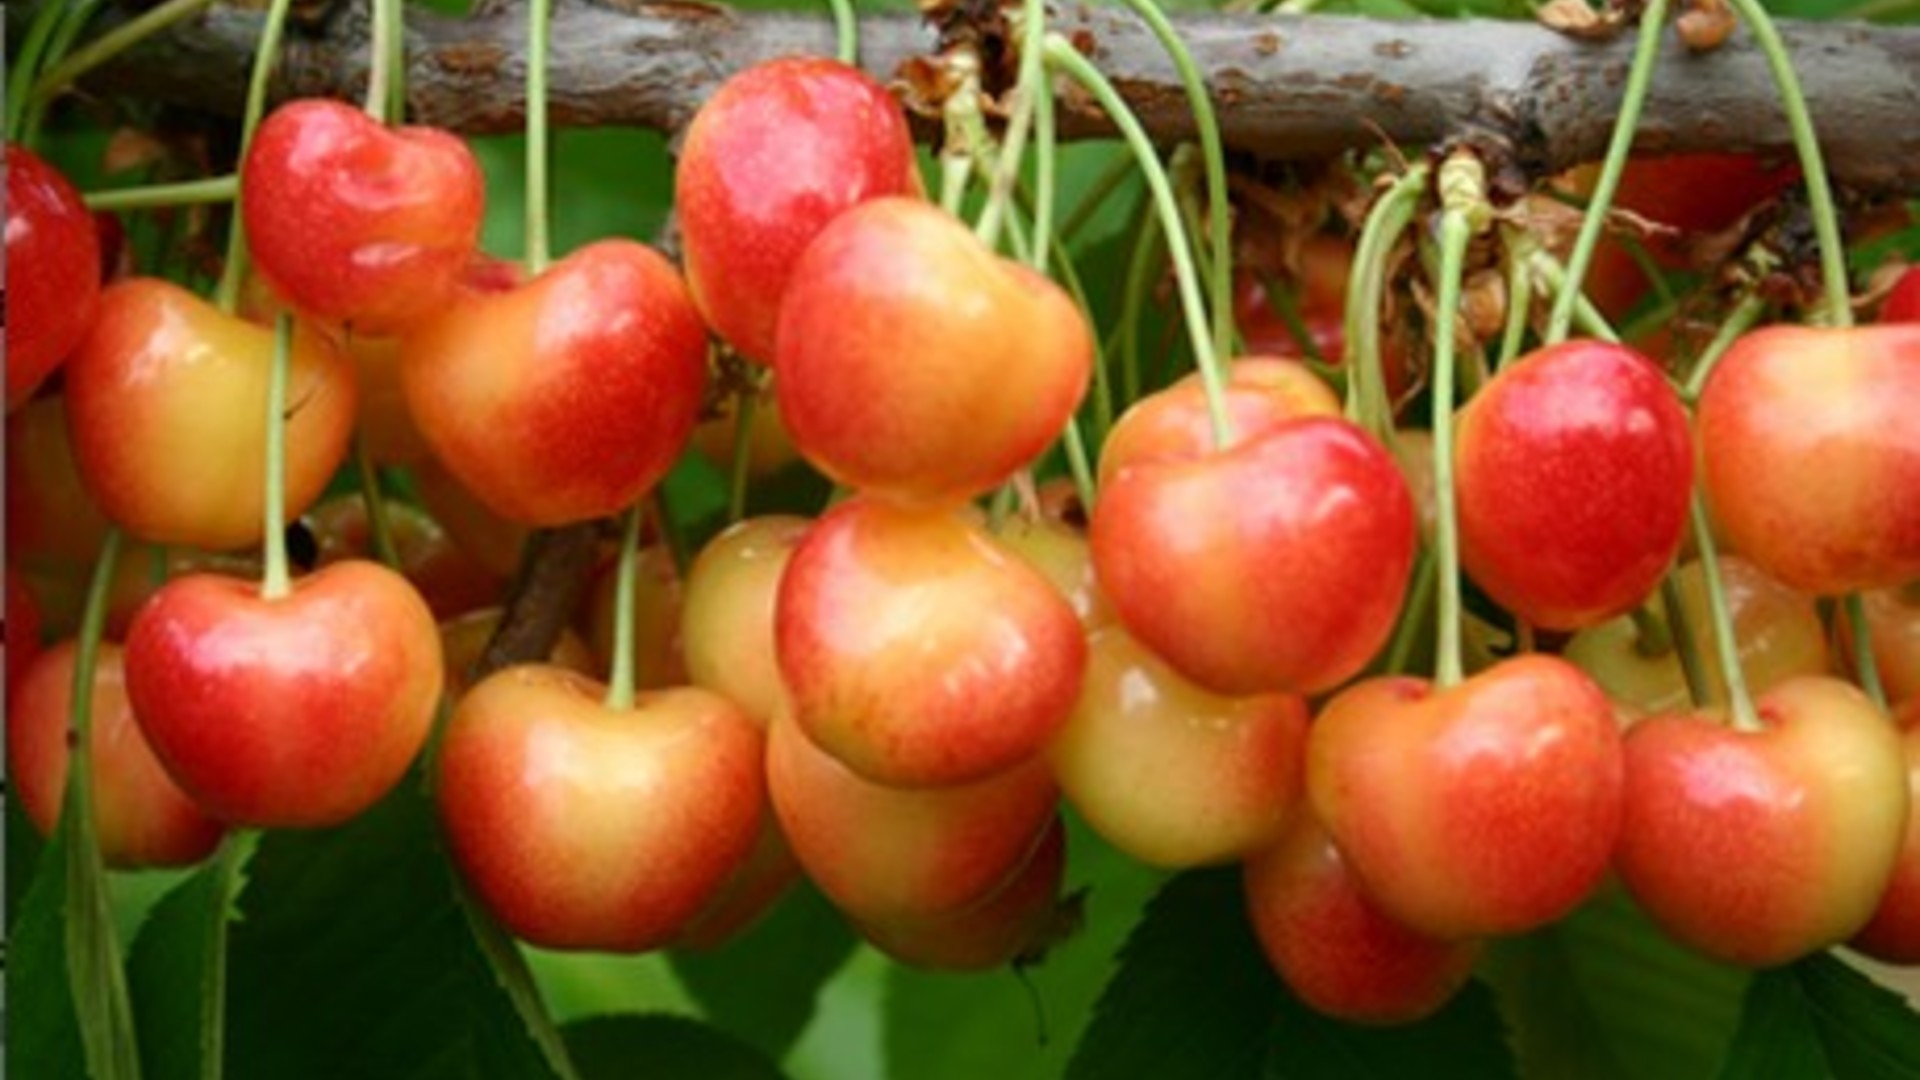 Cherries in the COVID-19 World Pt 2